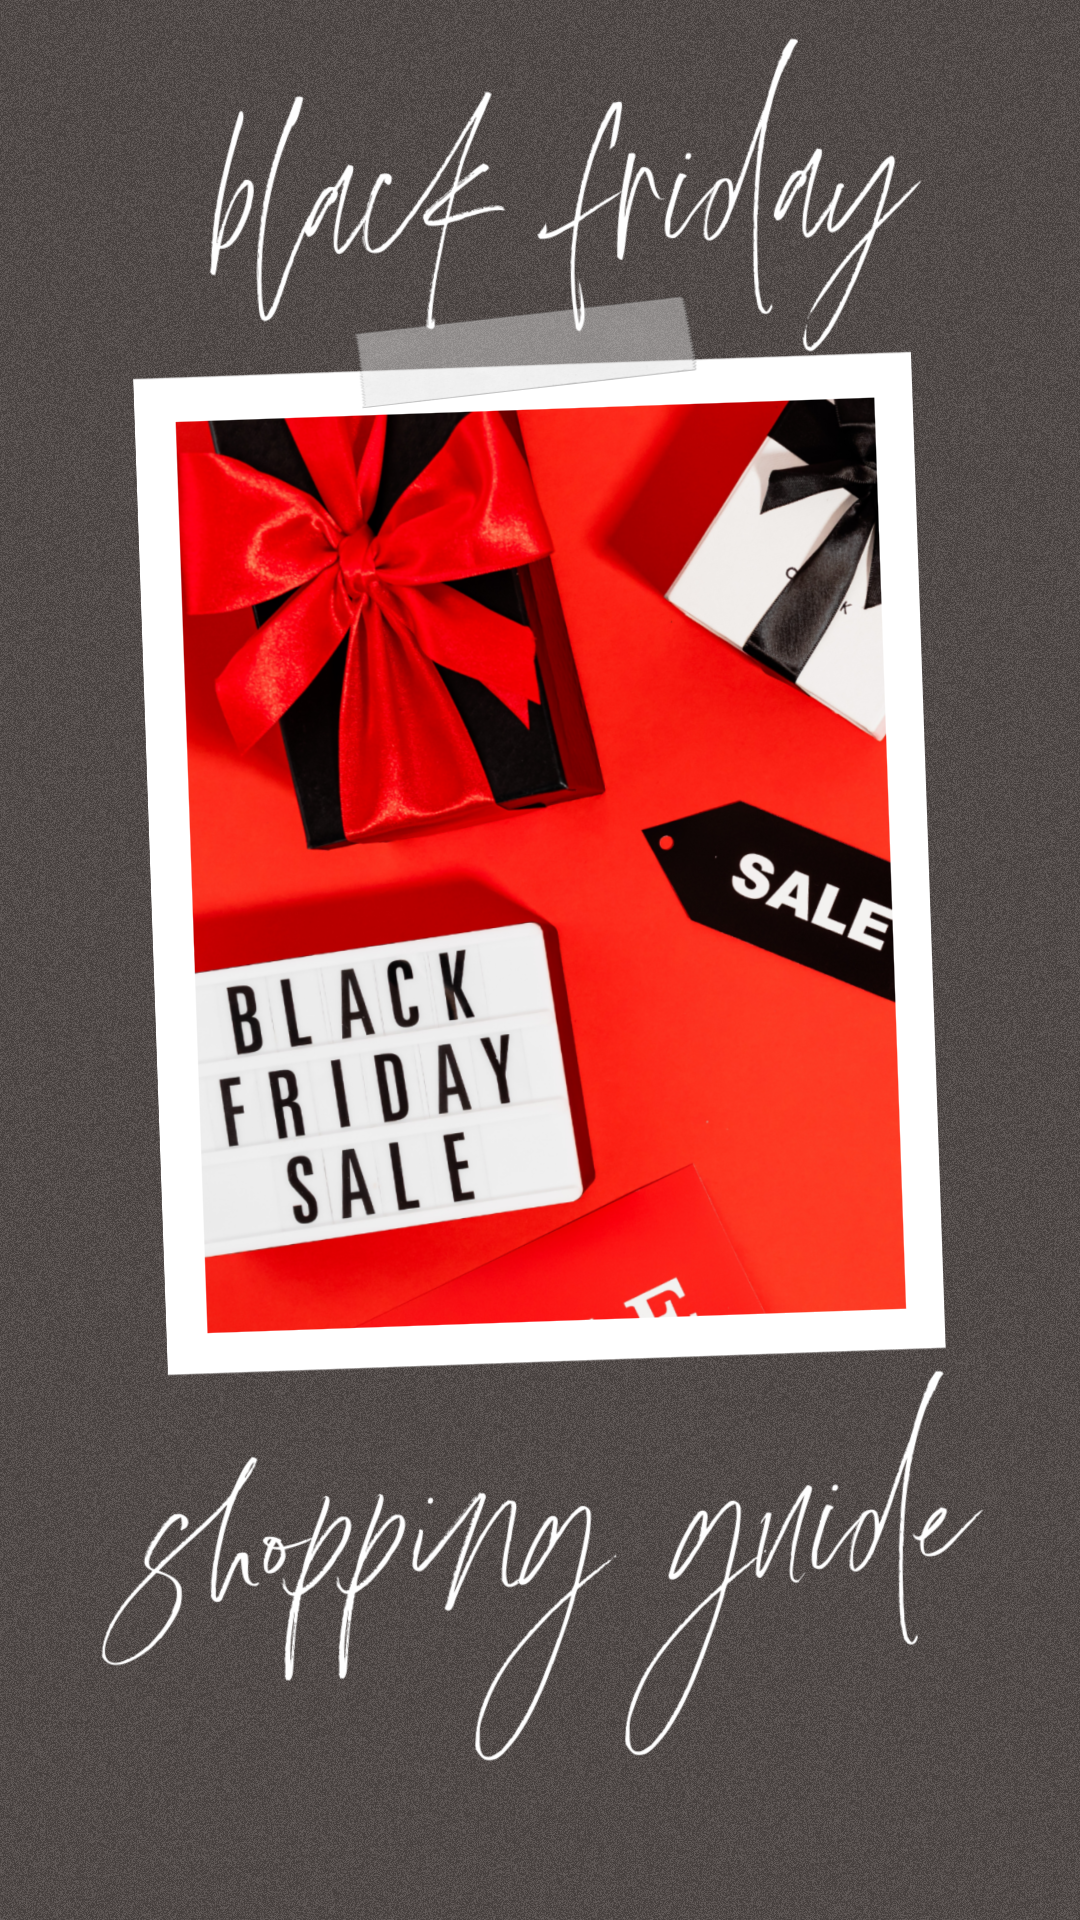 blog cover for holiday sales black friday shopping guide